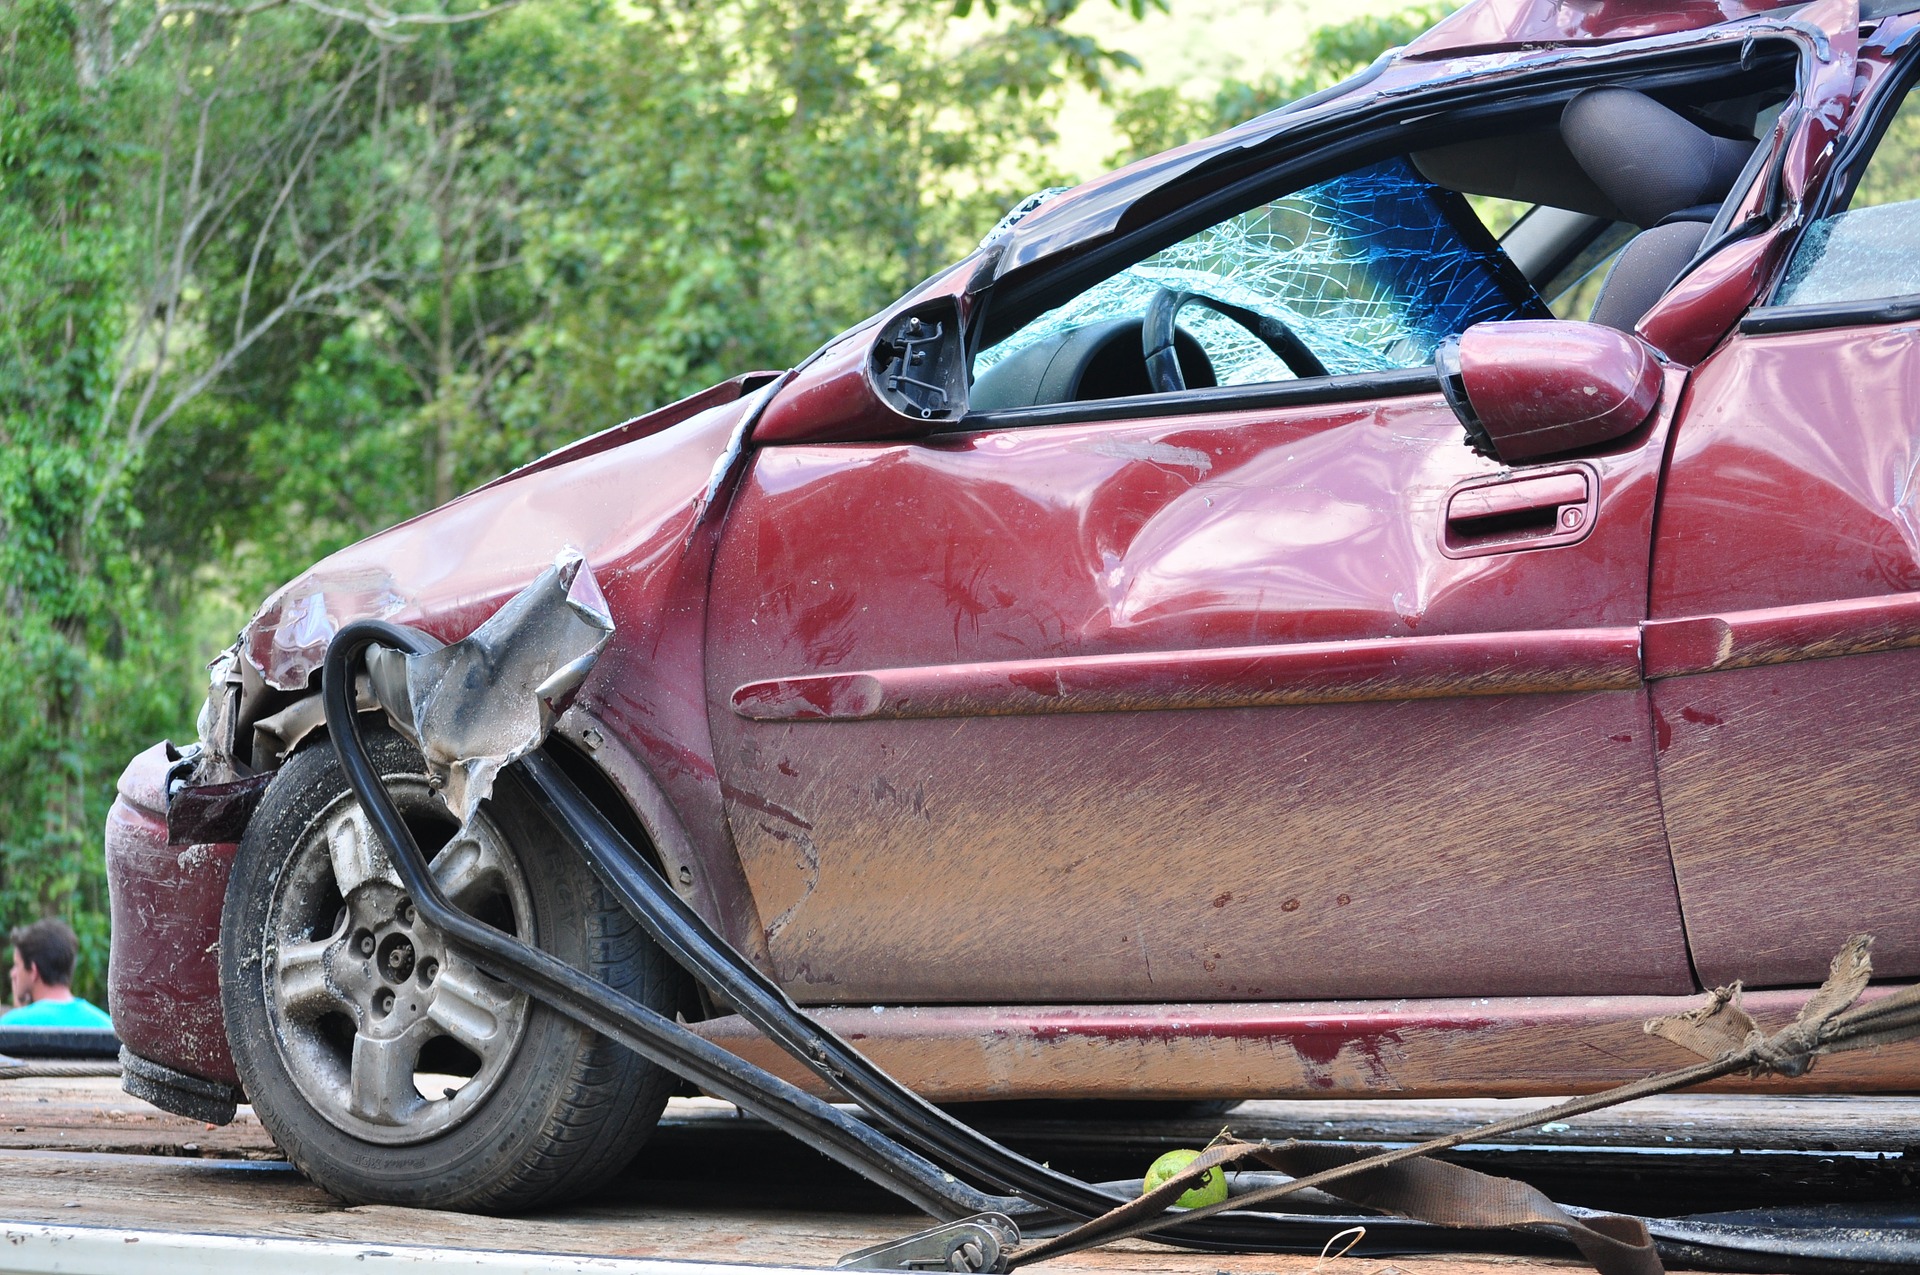 How Much Does Your Car Insurance Increase After an Accident? And What Are Your Next Steps?